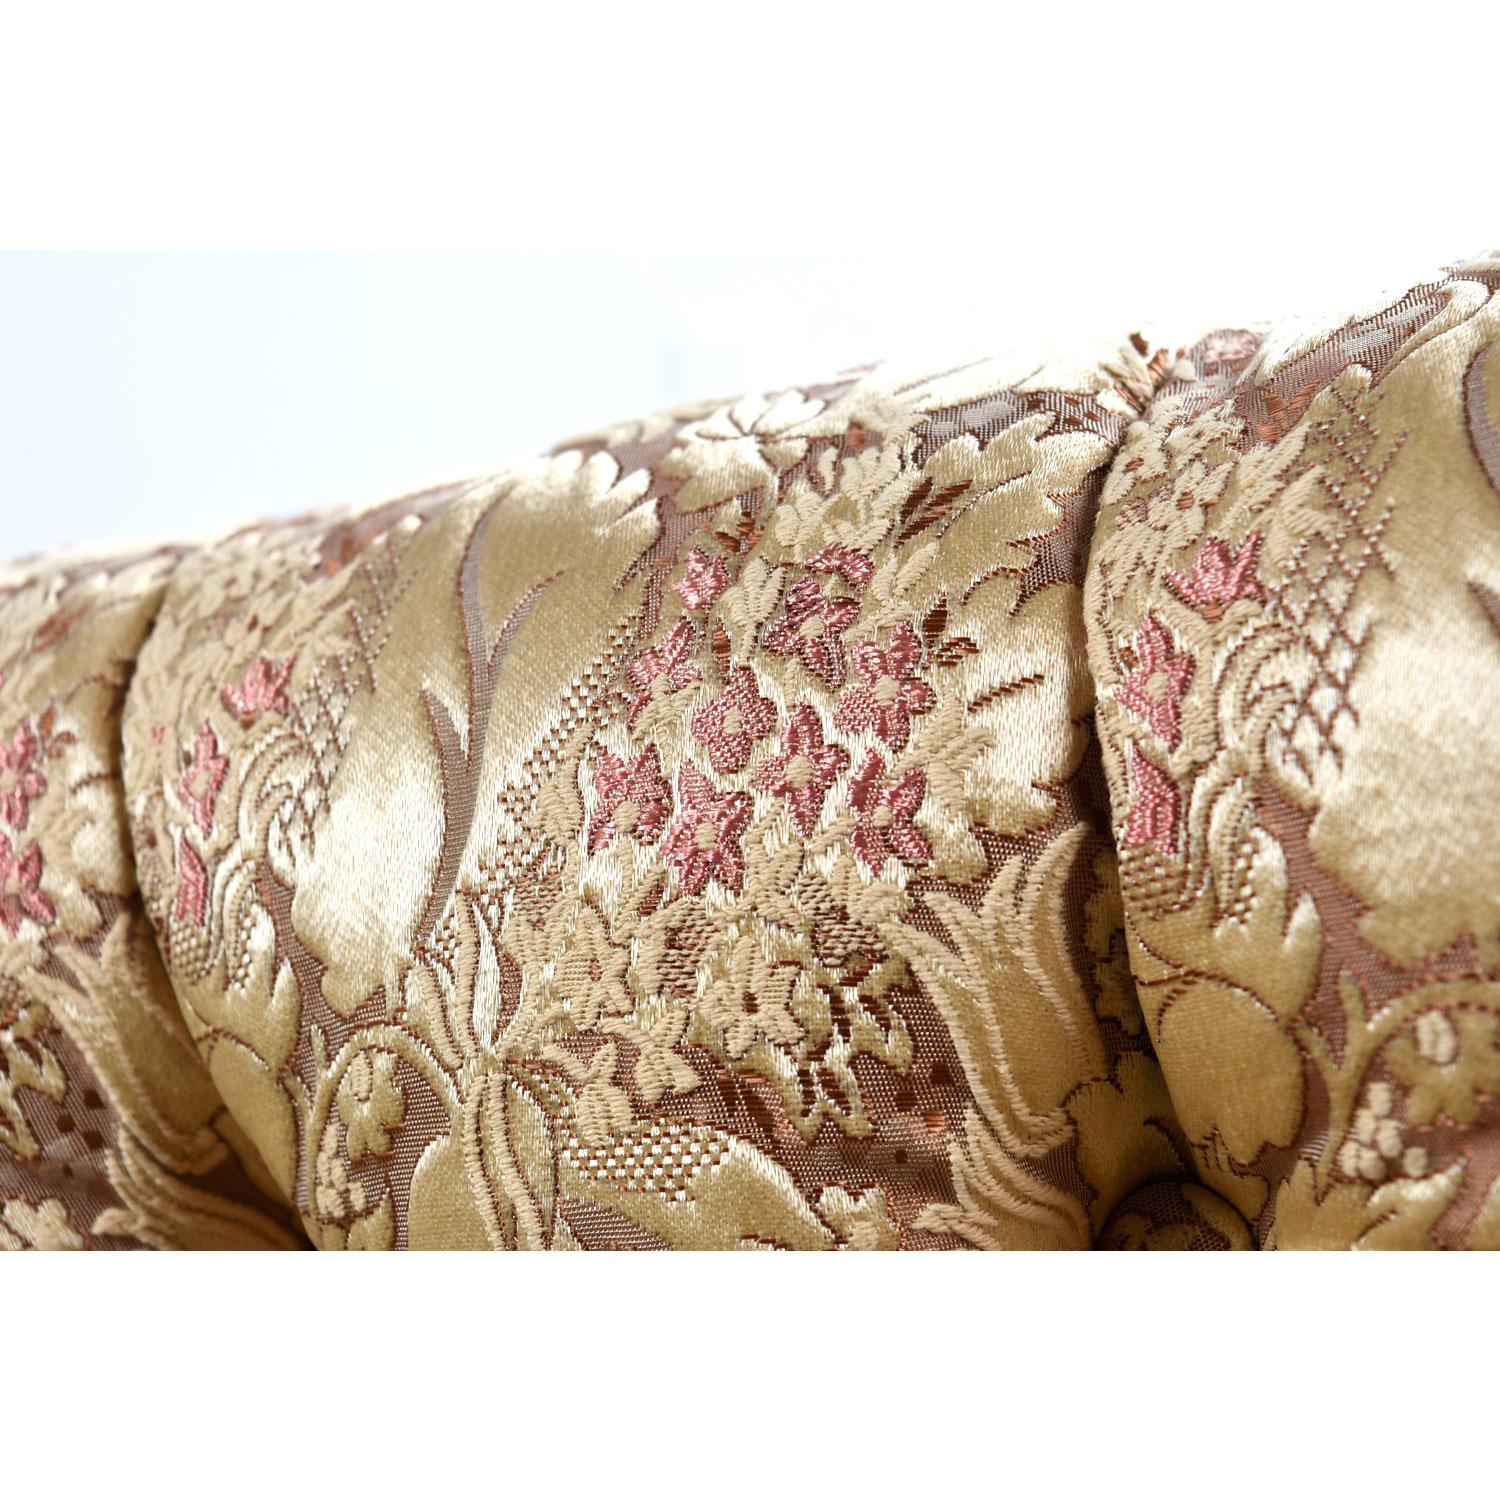 American Tufted Antique Victorian Bohemian Rose Gold and Beige Floral Settee